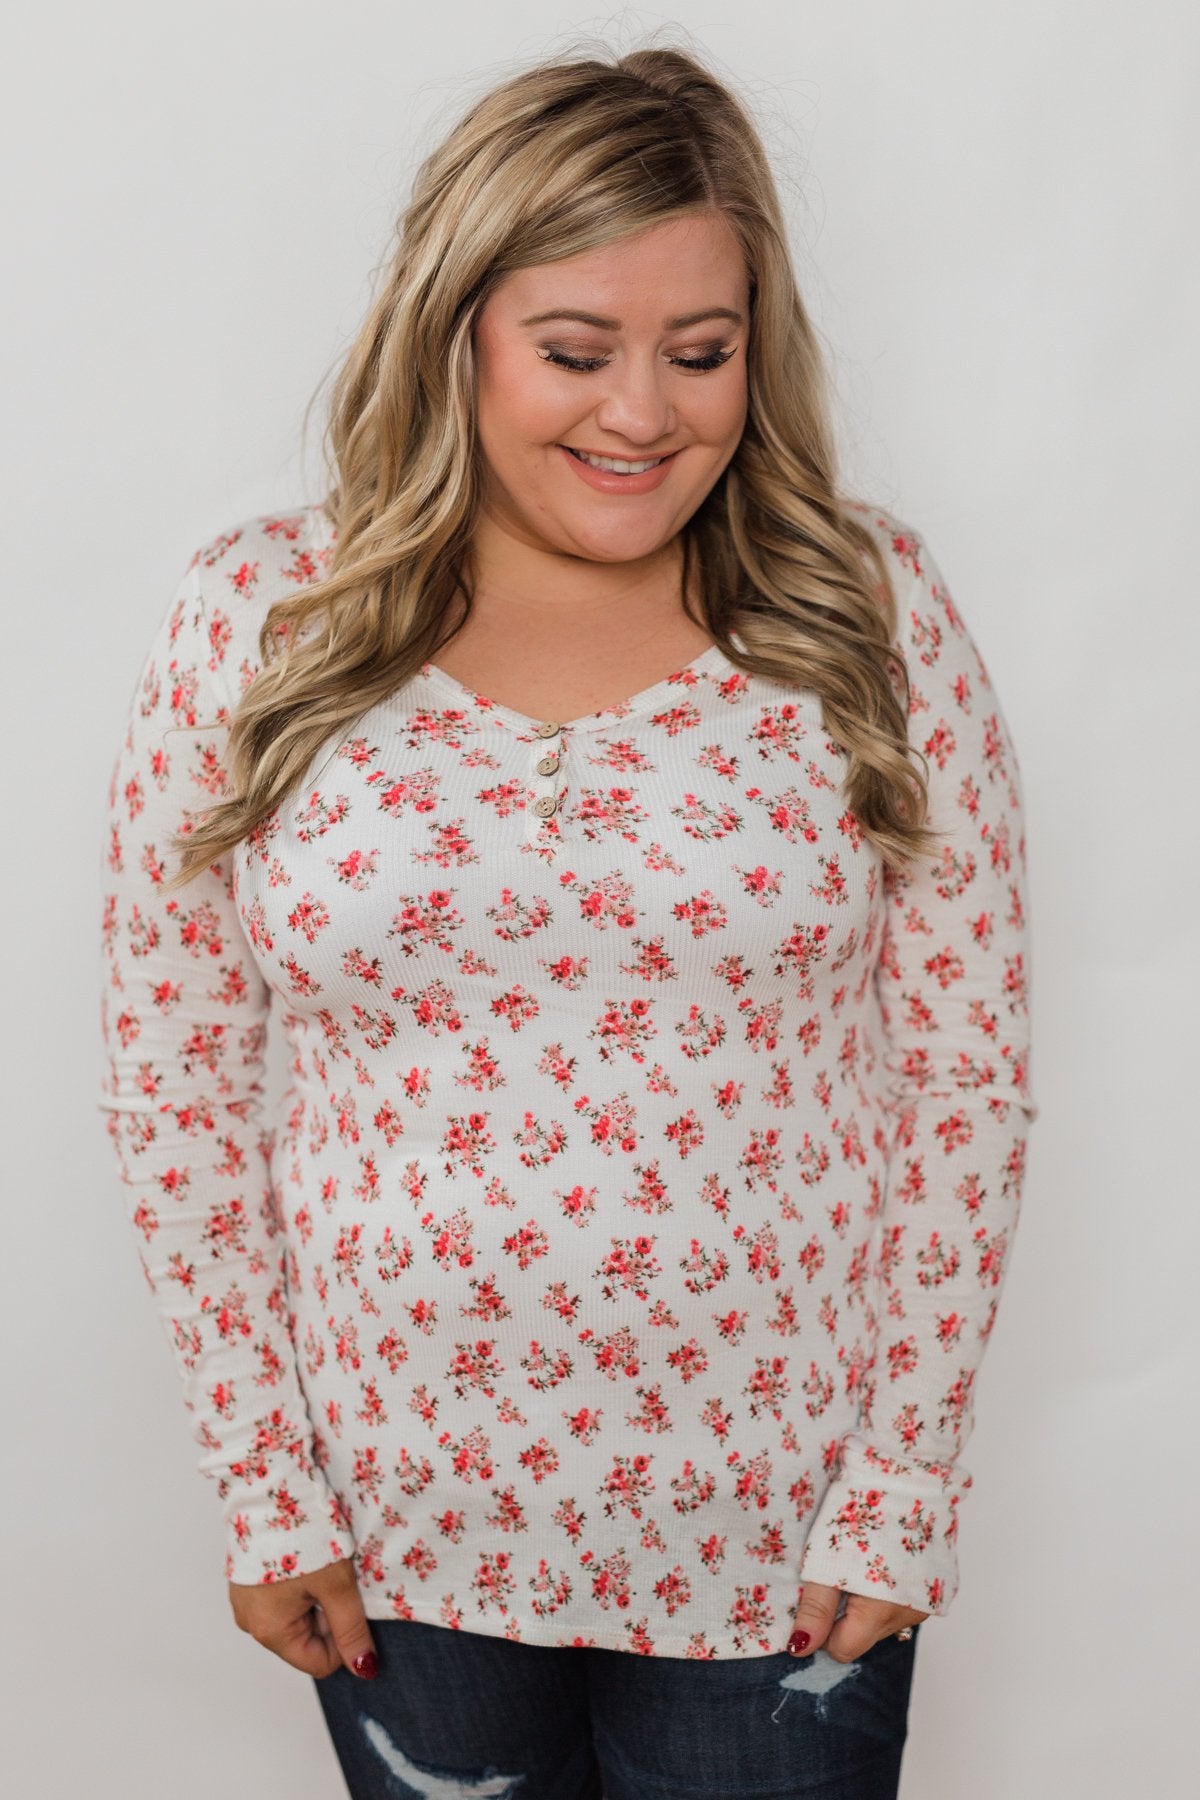 Blossoming Beauty 3-Button Henley Top - Ivory